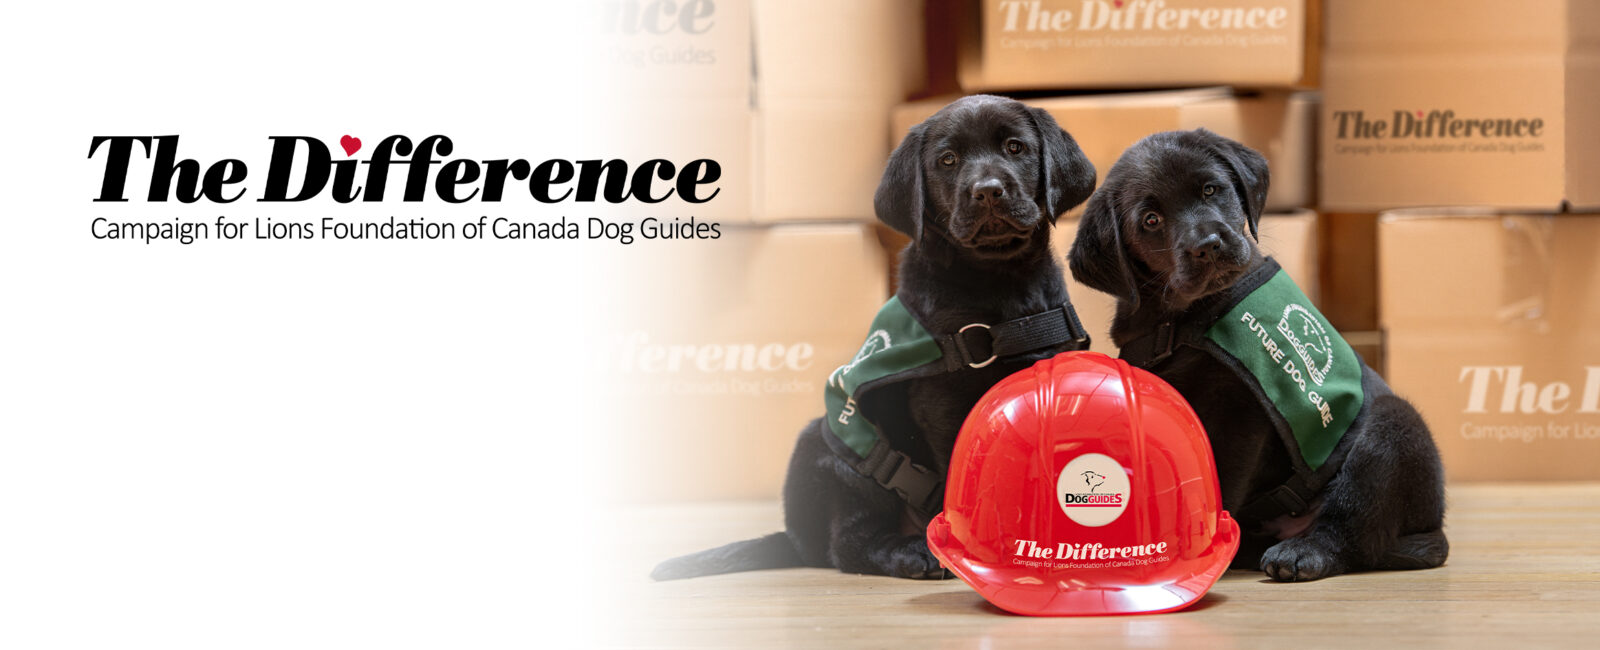 Two black lab puppies sit behind red construction hat